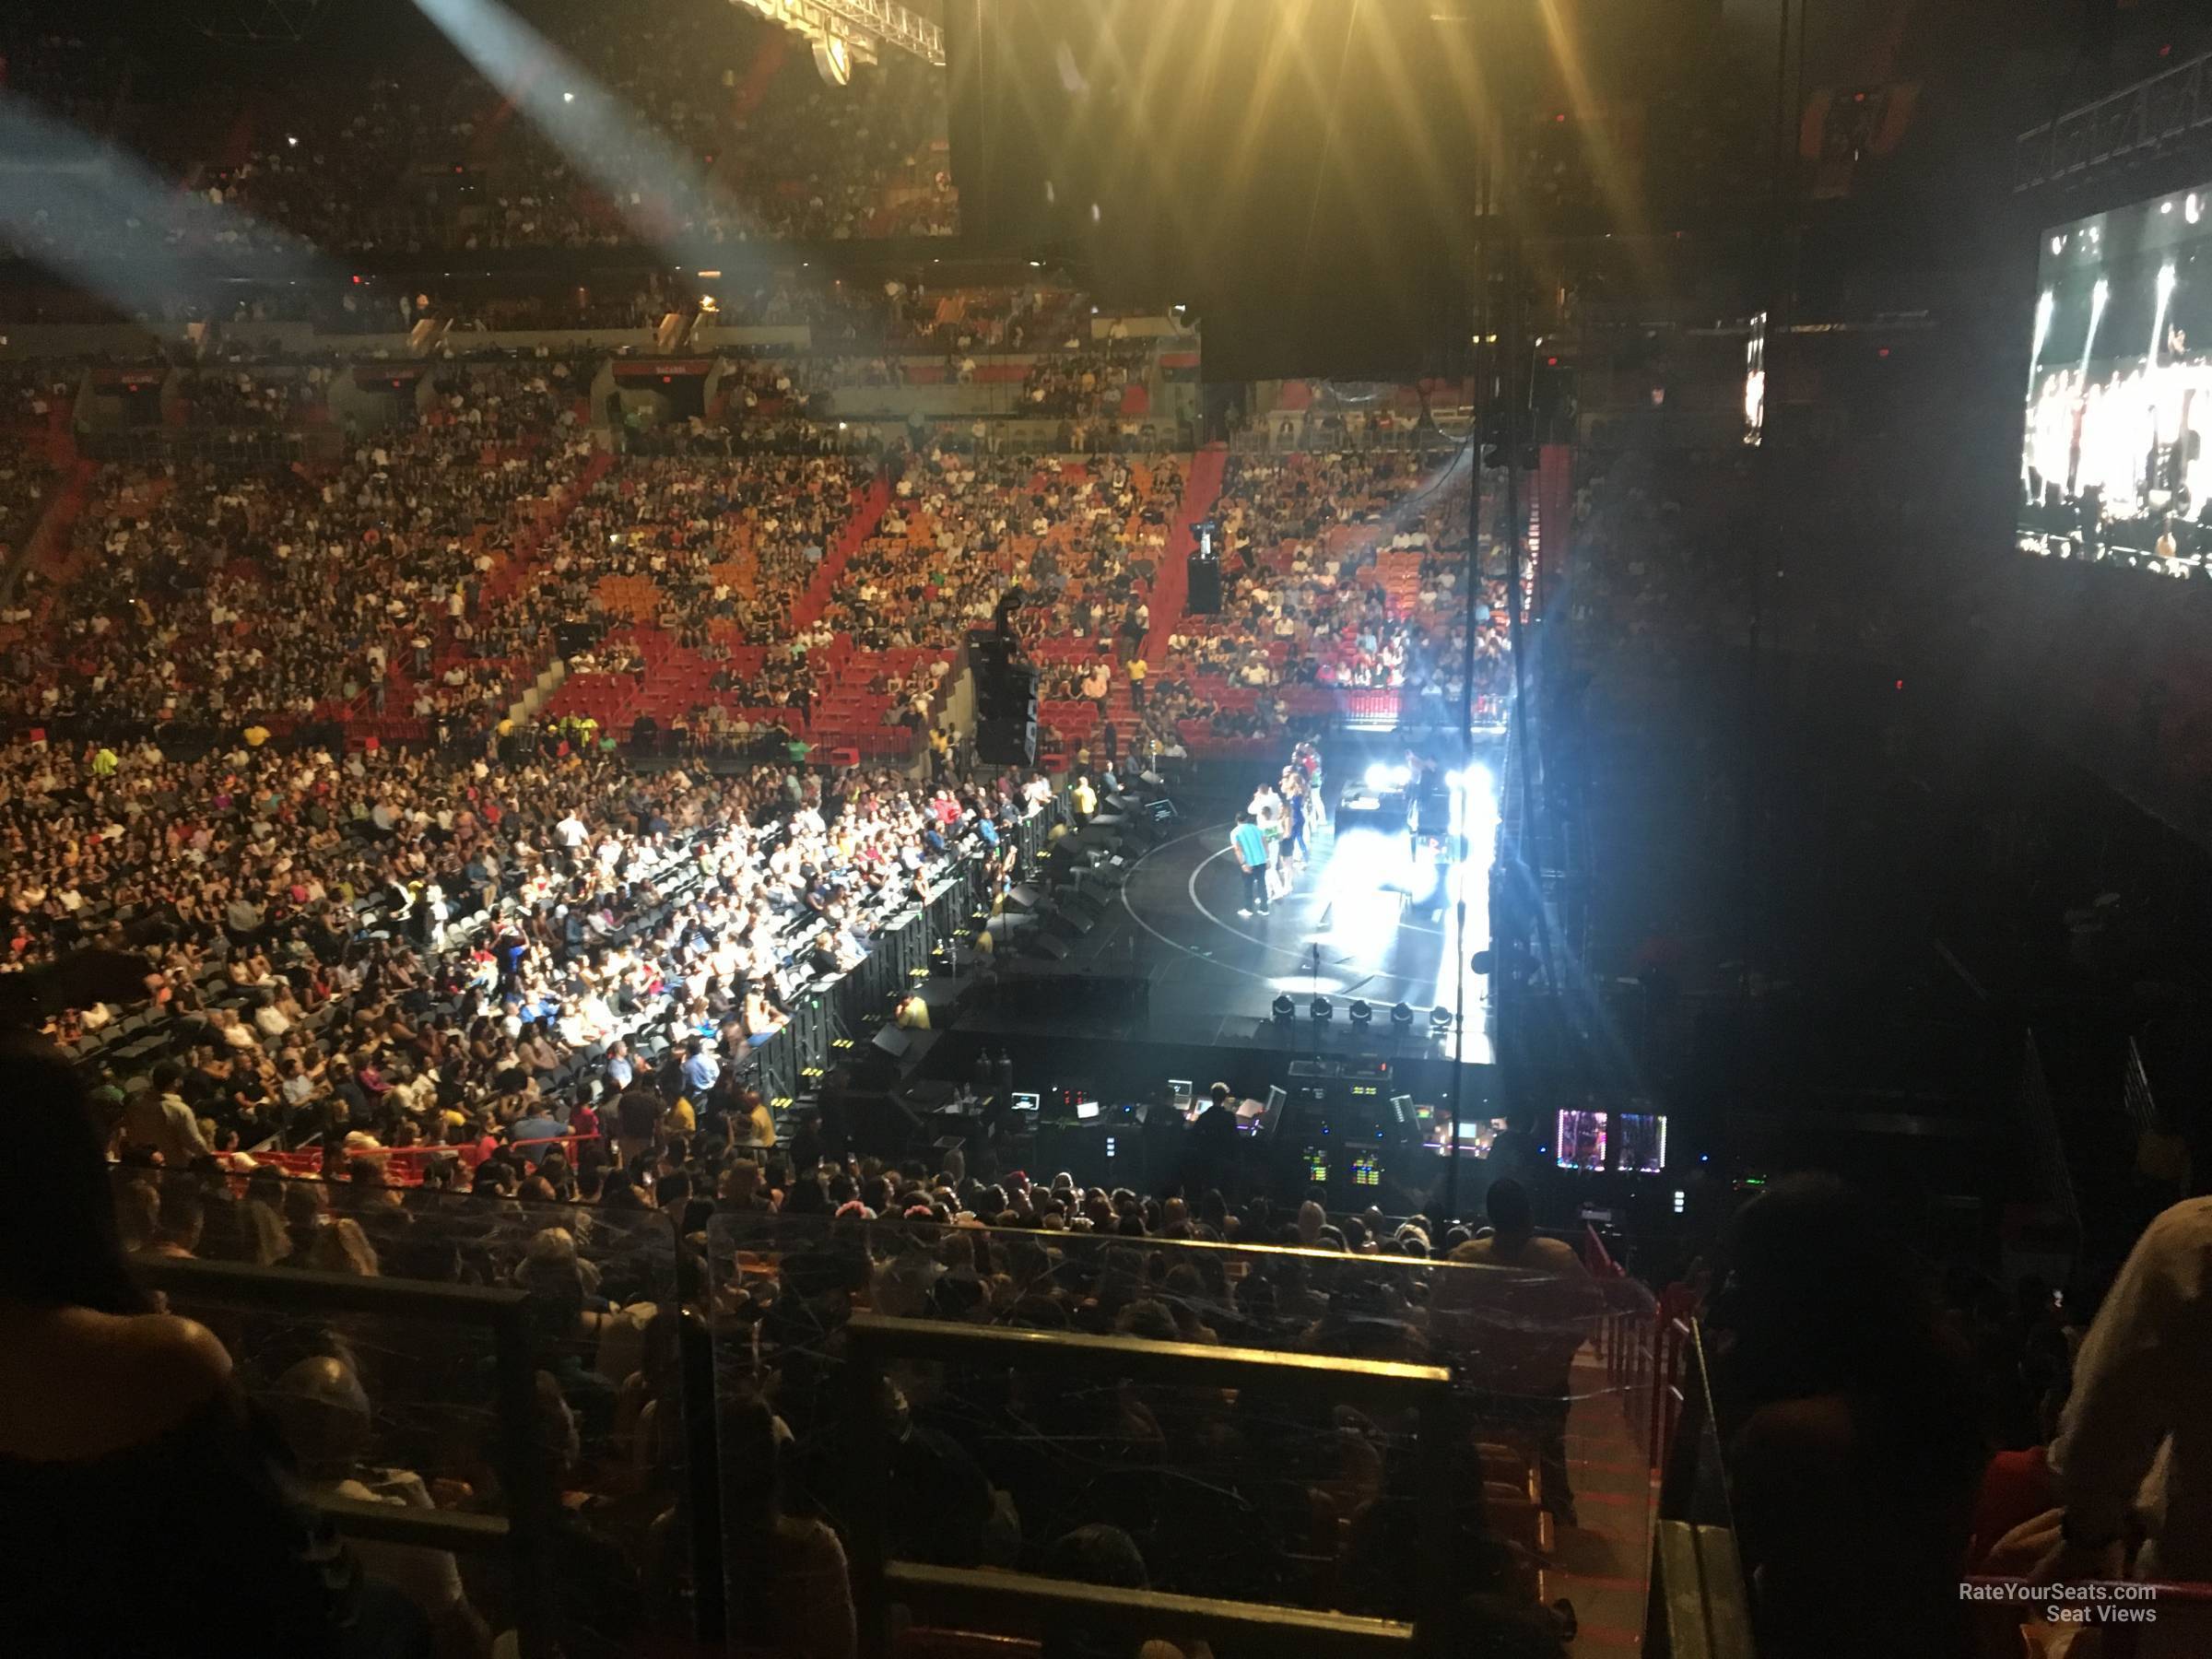 section 105, row 29 seat view  for concert - miami-dade arena